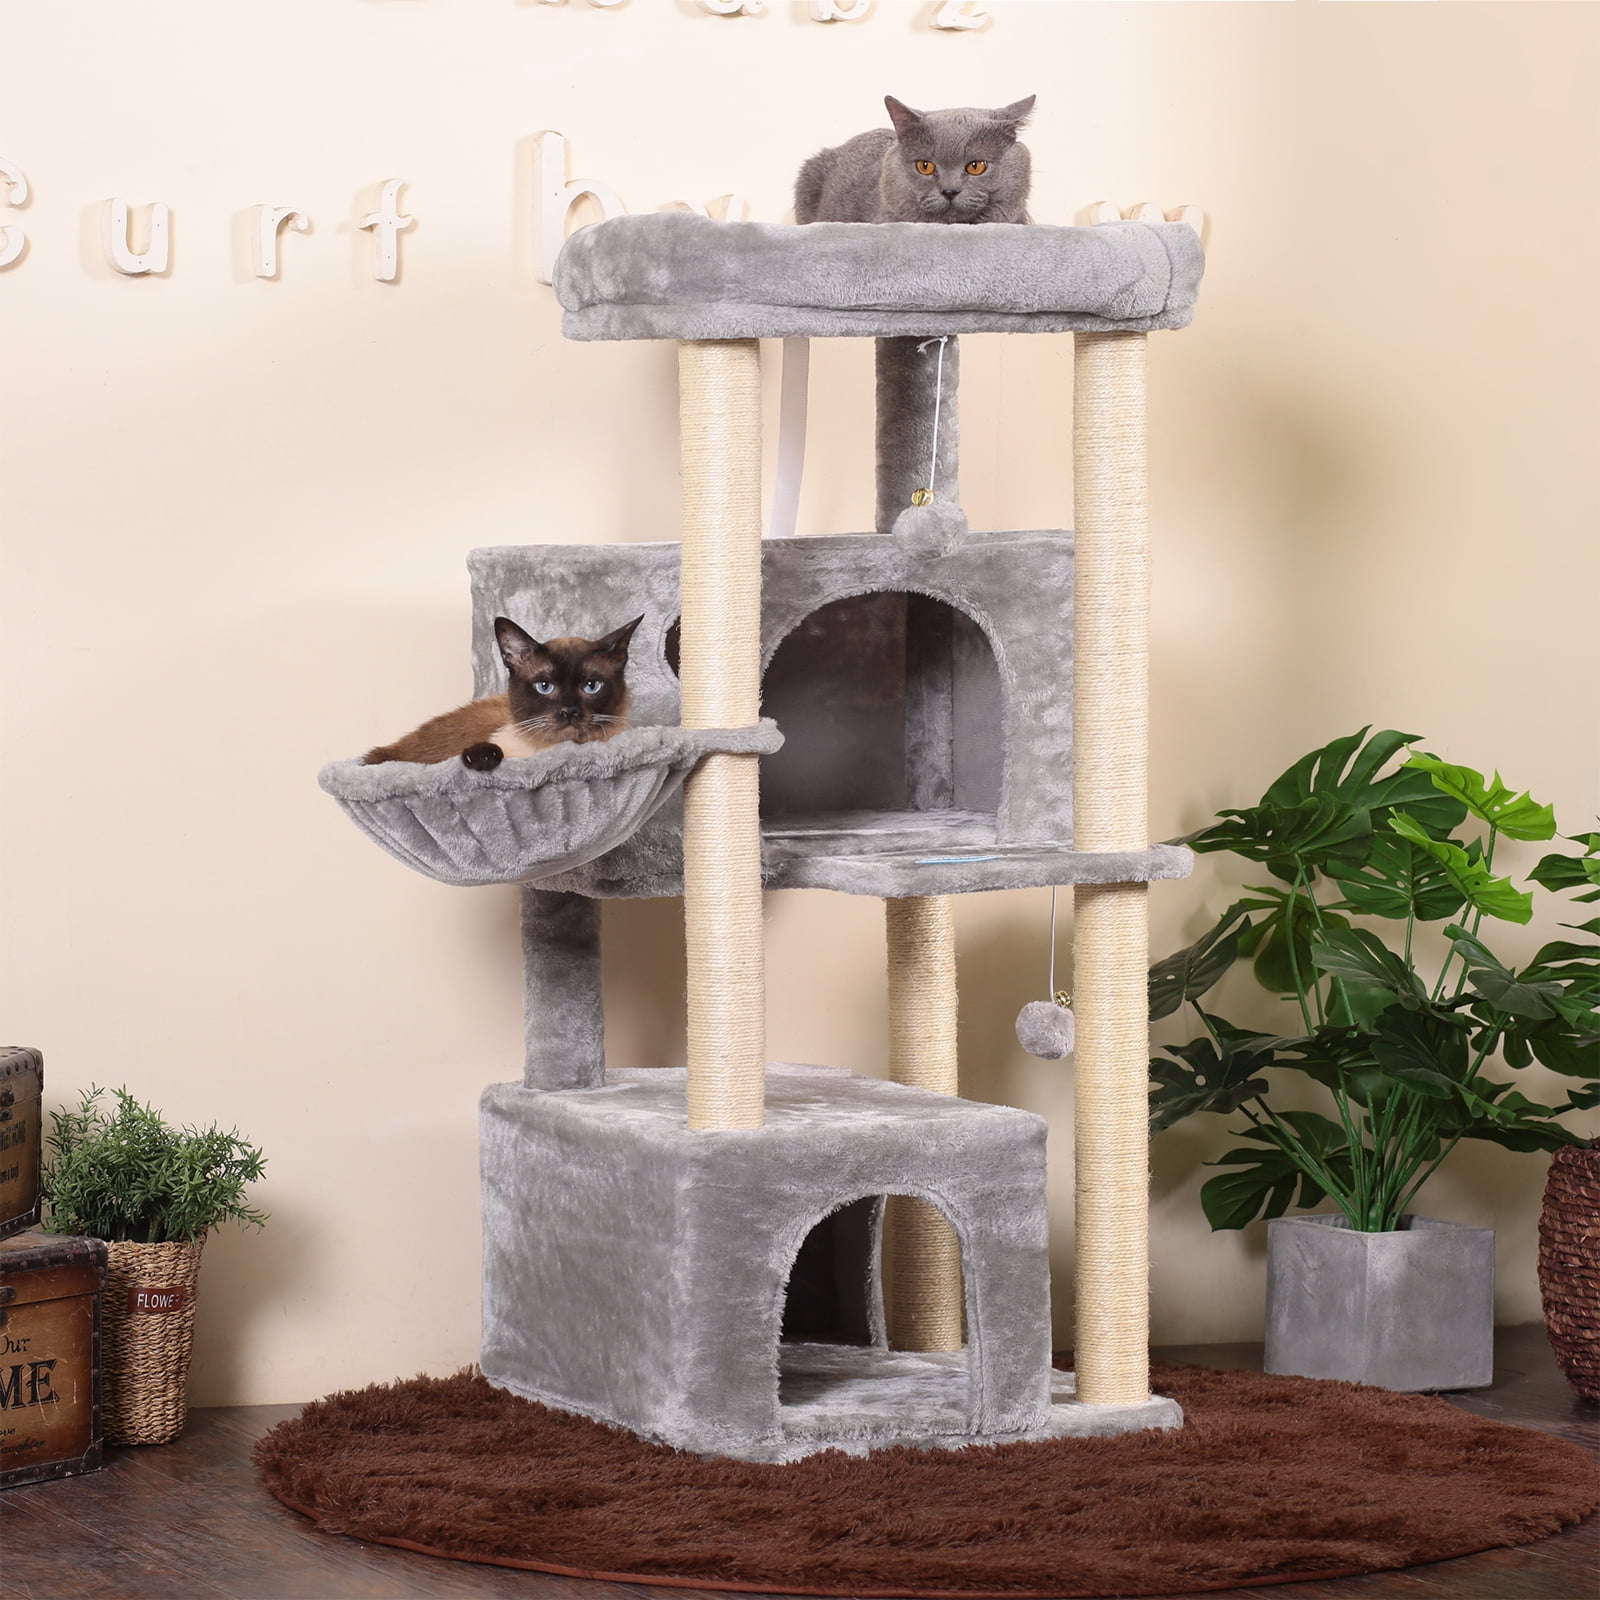 Hey-brother 43.3 inches Cat Tree,Multi-Level Cat Condo Tower with Big Plush  Perches for Large Cat Light Gray